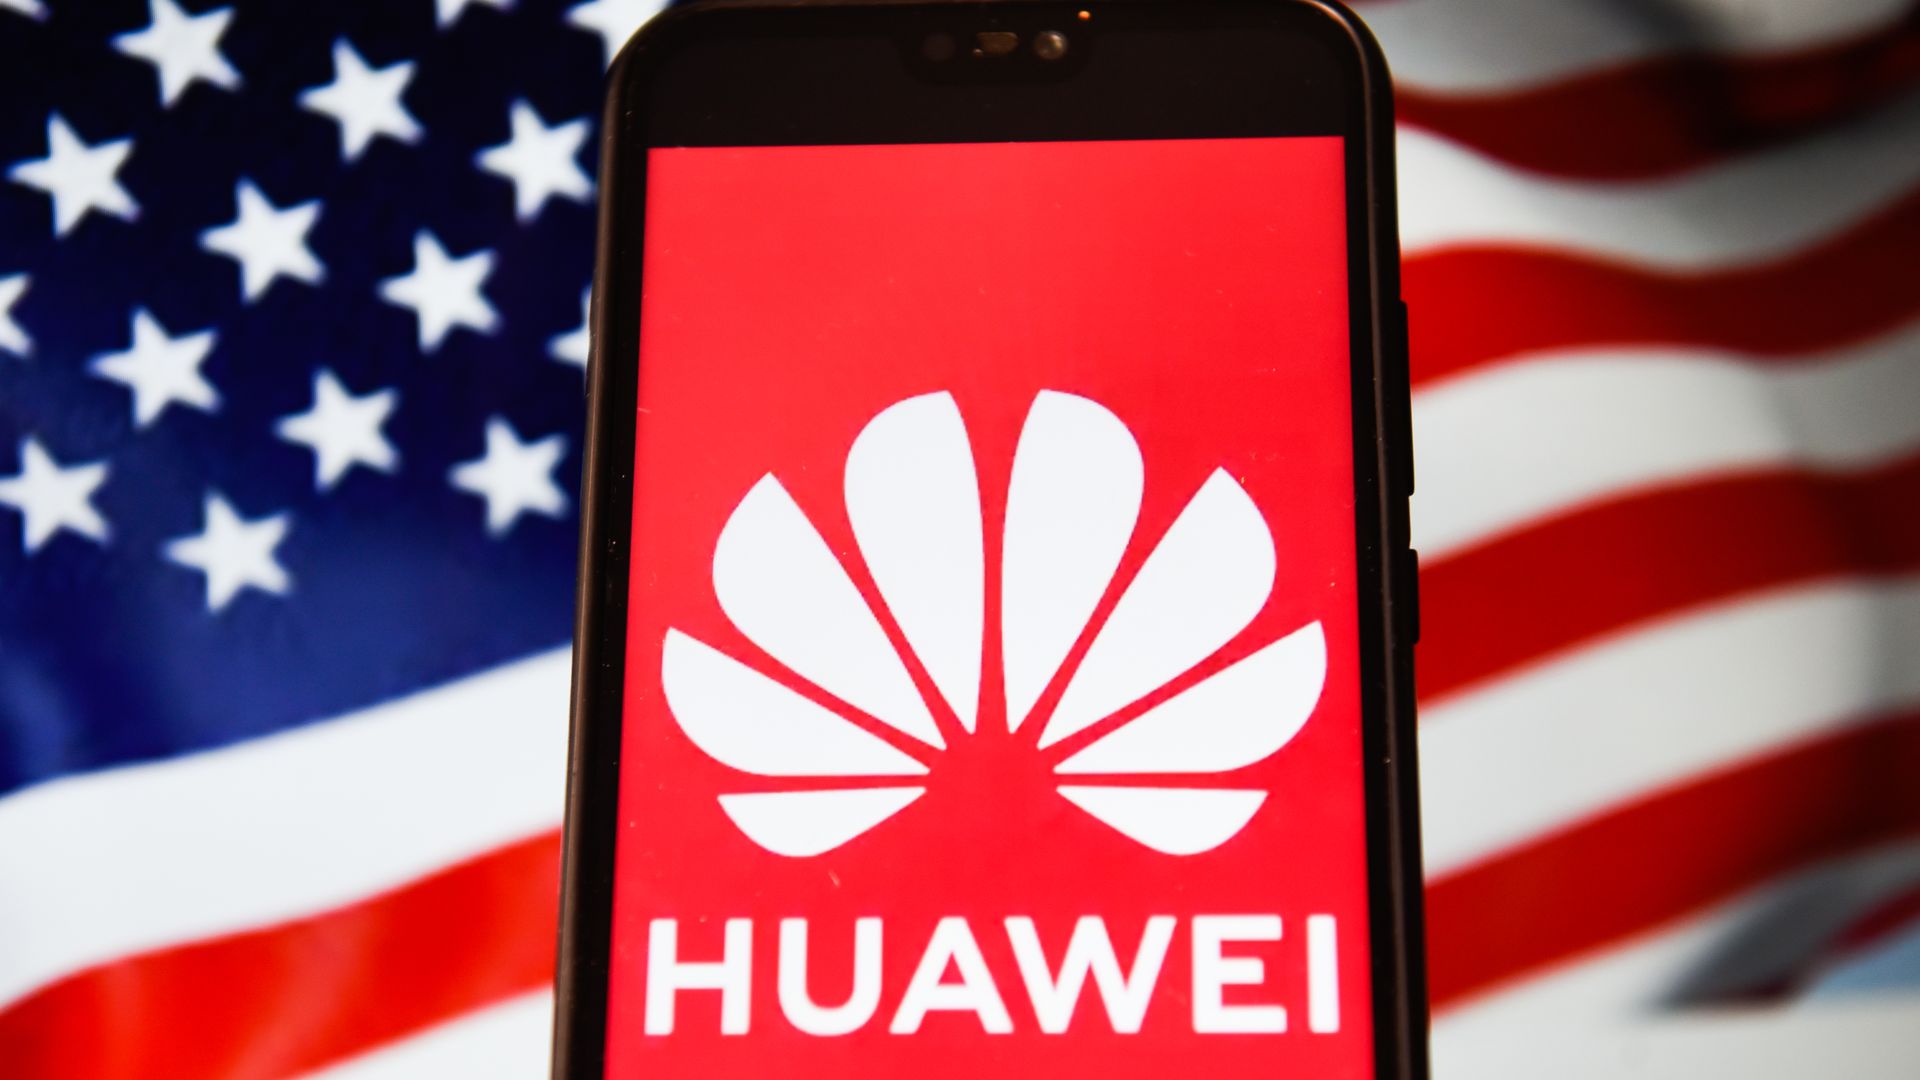 This photo shows the Huawei logo displayed on a phone with the American flag in the background.